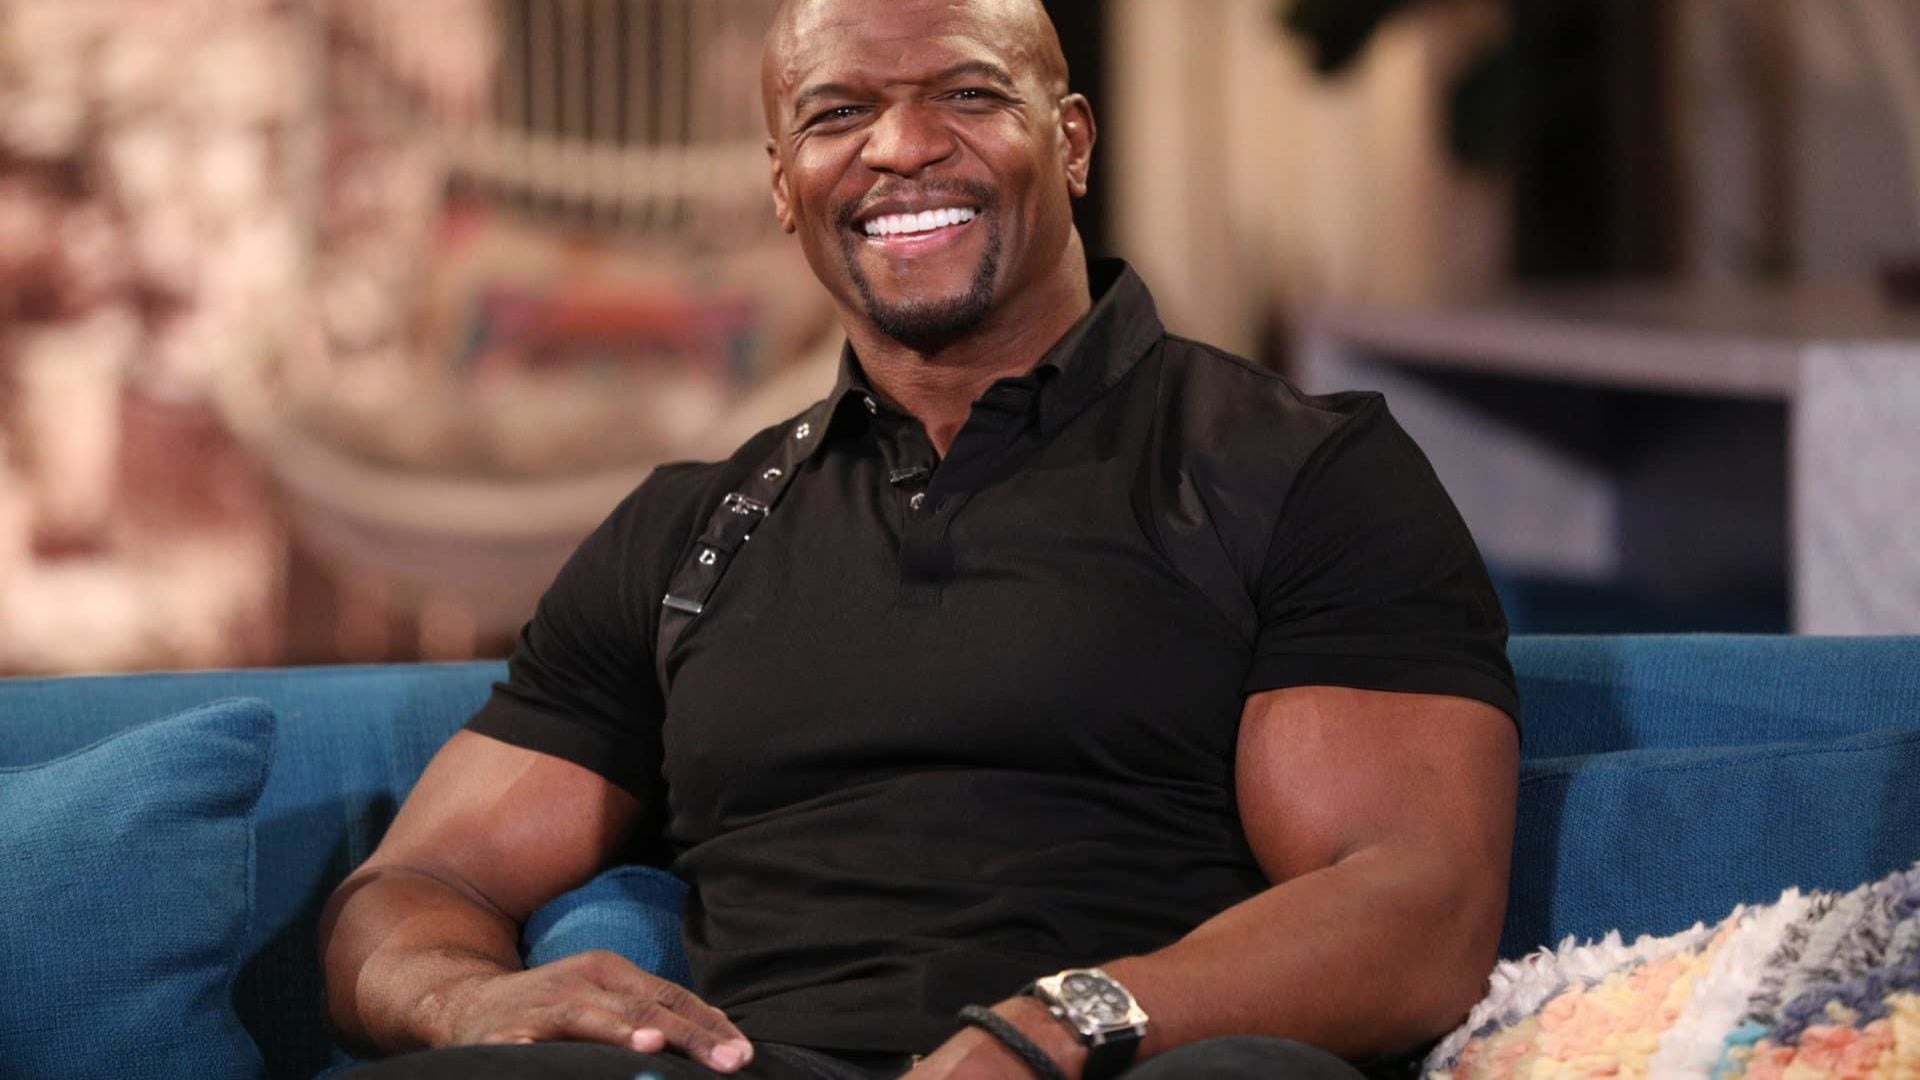 Marriage Porn - Terry Crews Opens Up About Porn Addiction That Nearly ...